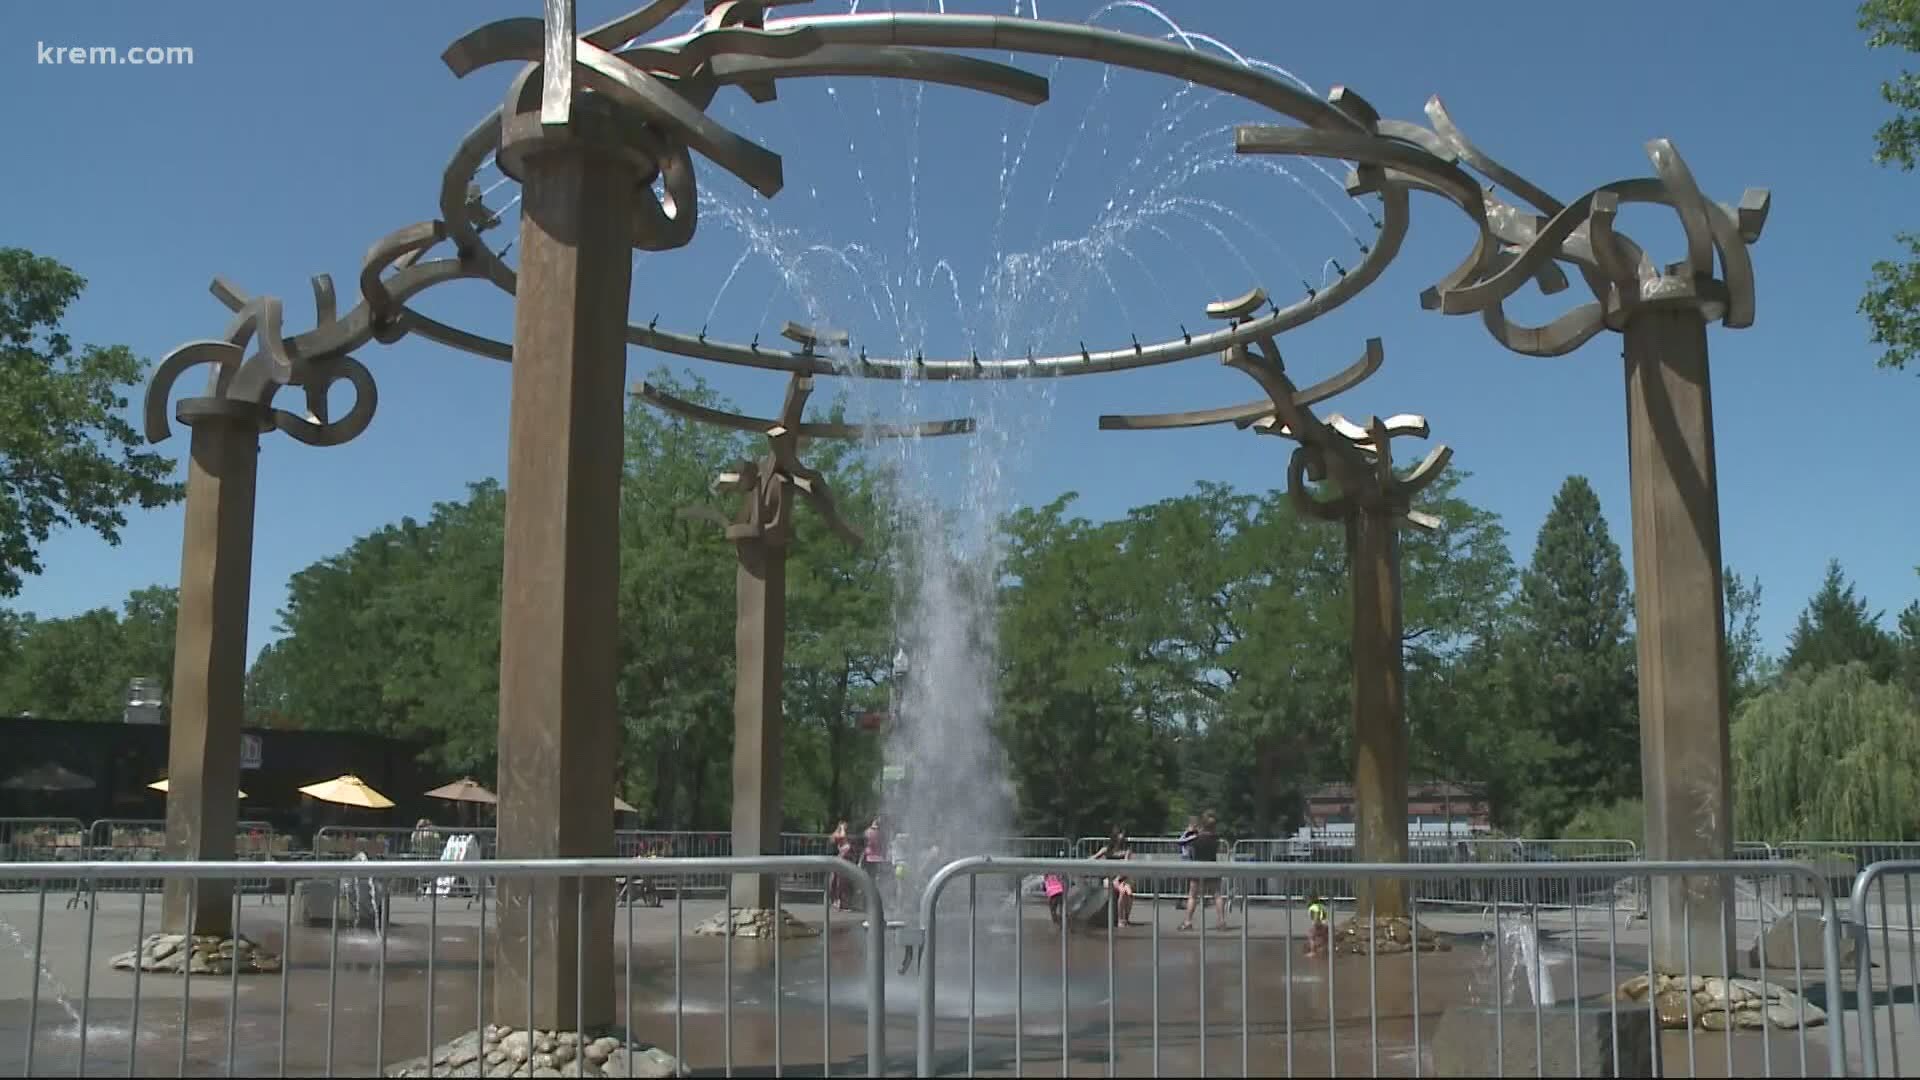 Currently, there are four splash pads open to the public to enjoy during the warm days ahead.